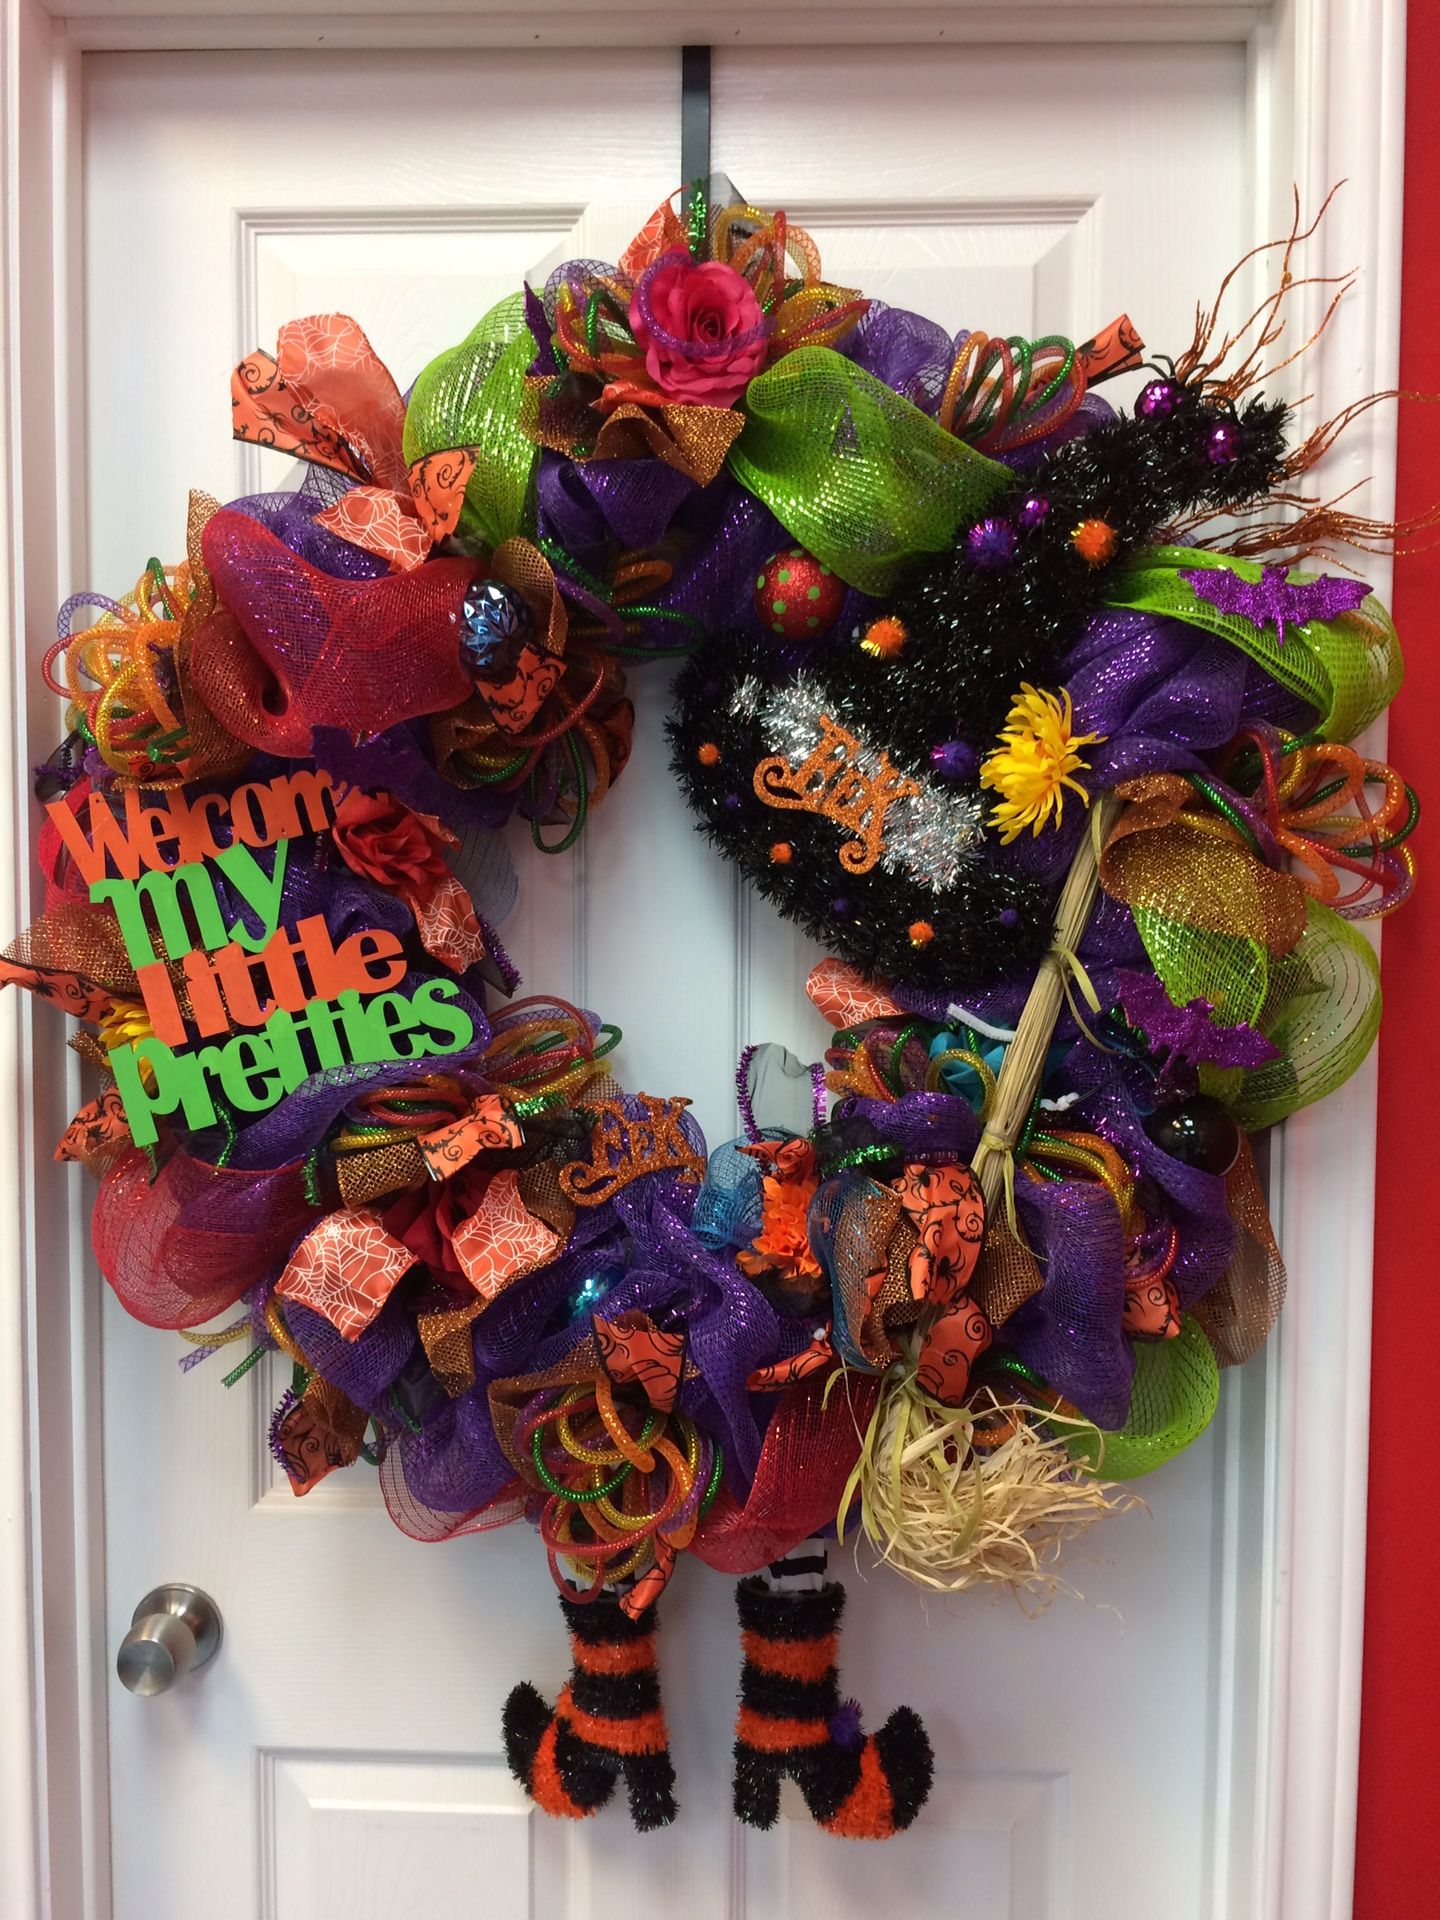 Extra large Halloween wreath with lights